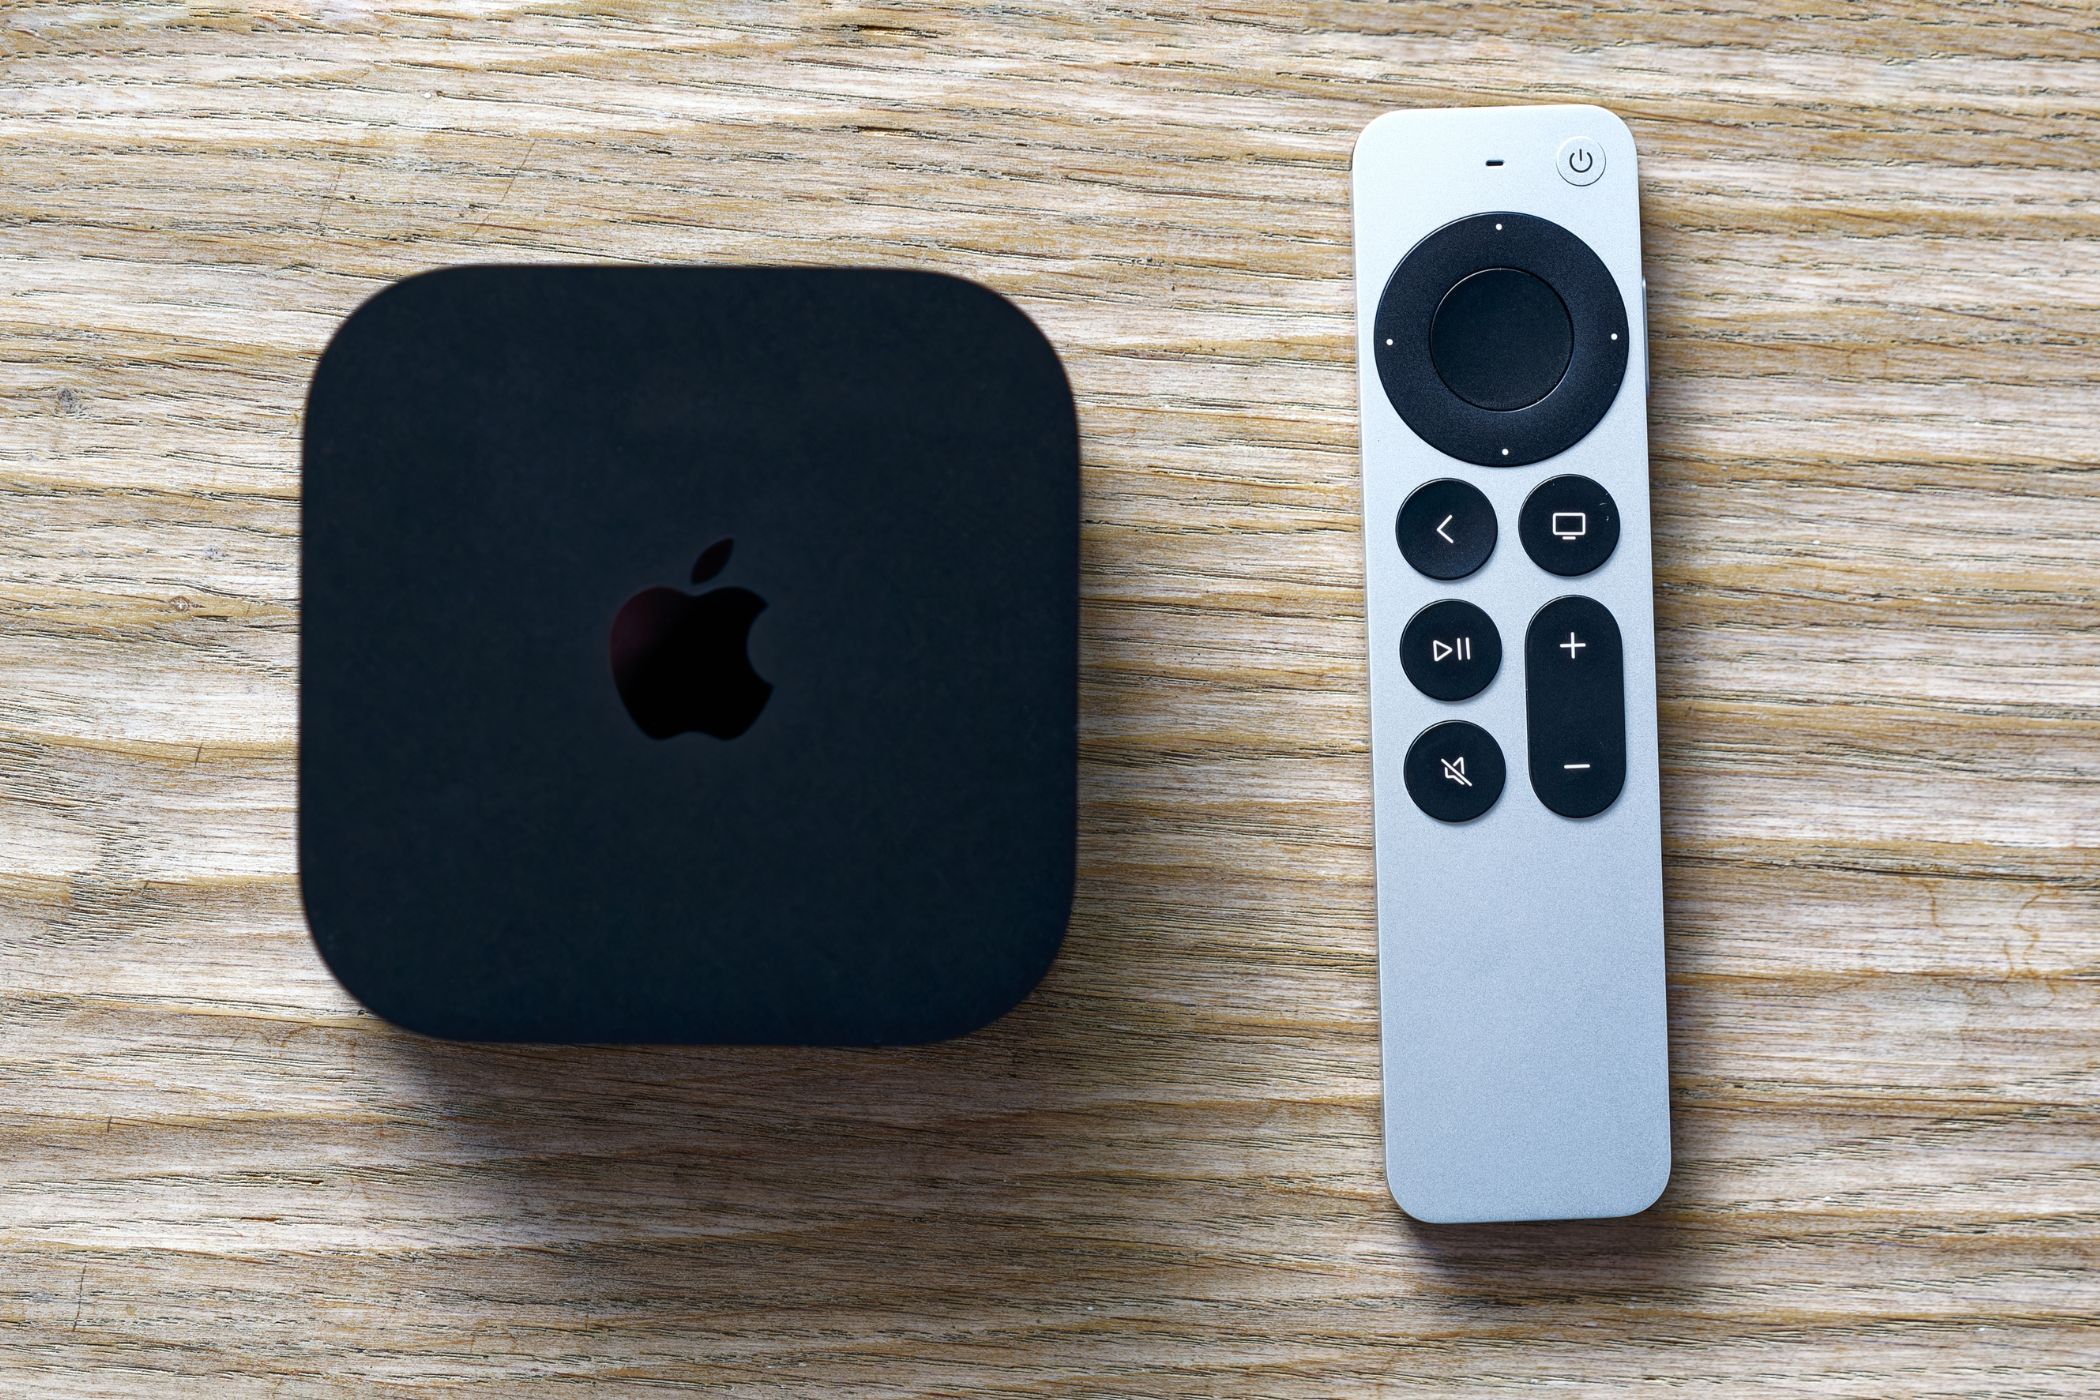 Apple TV 4k streaming box and remote control